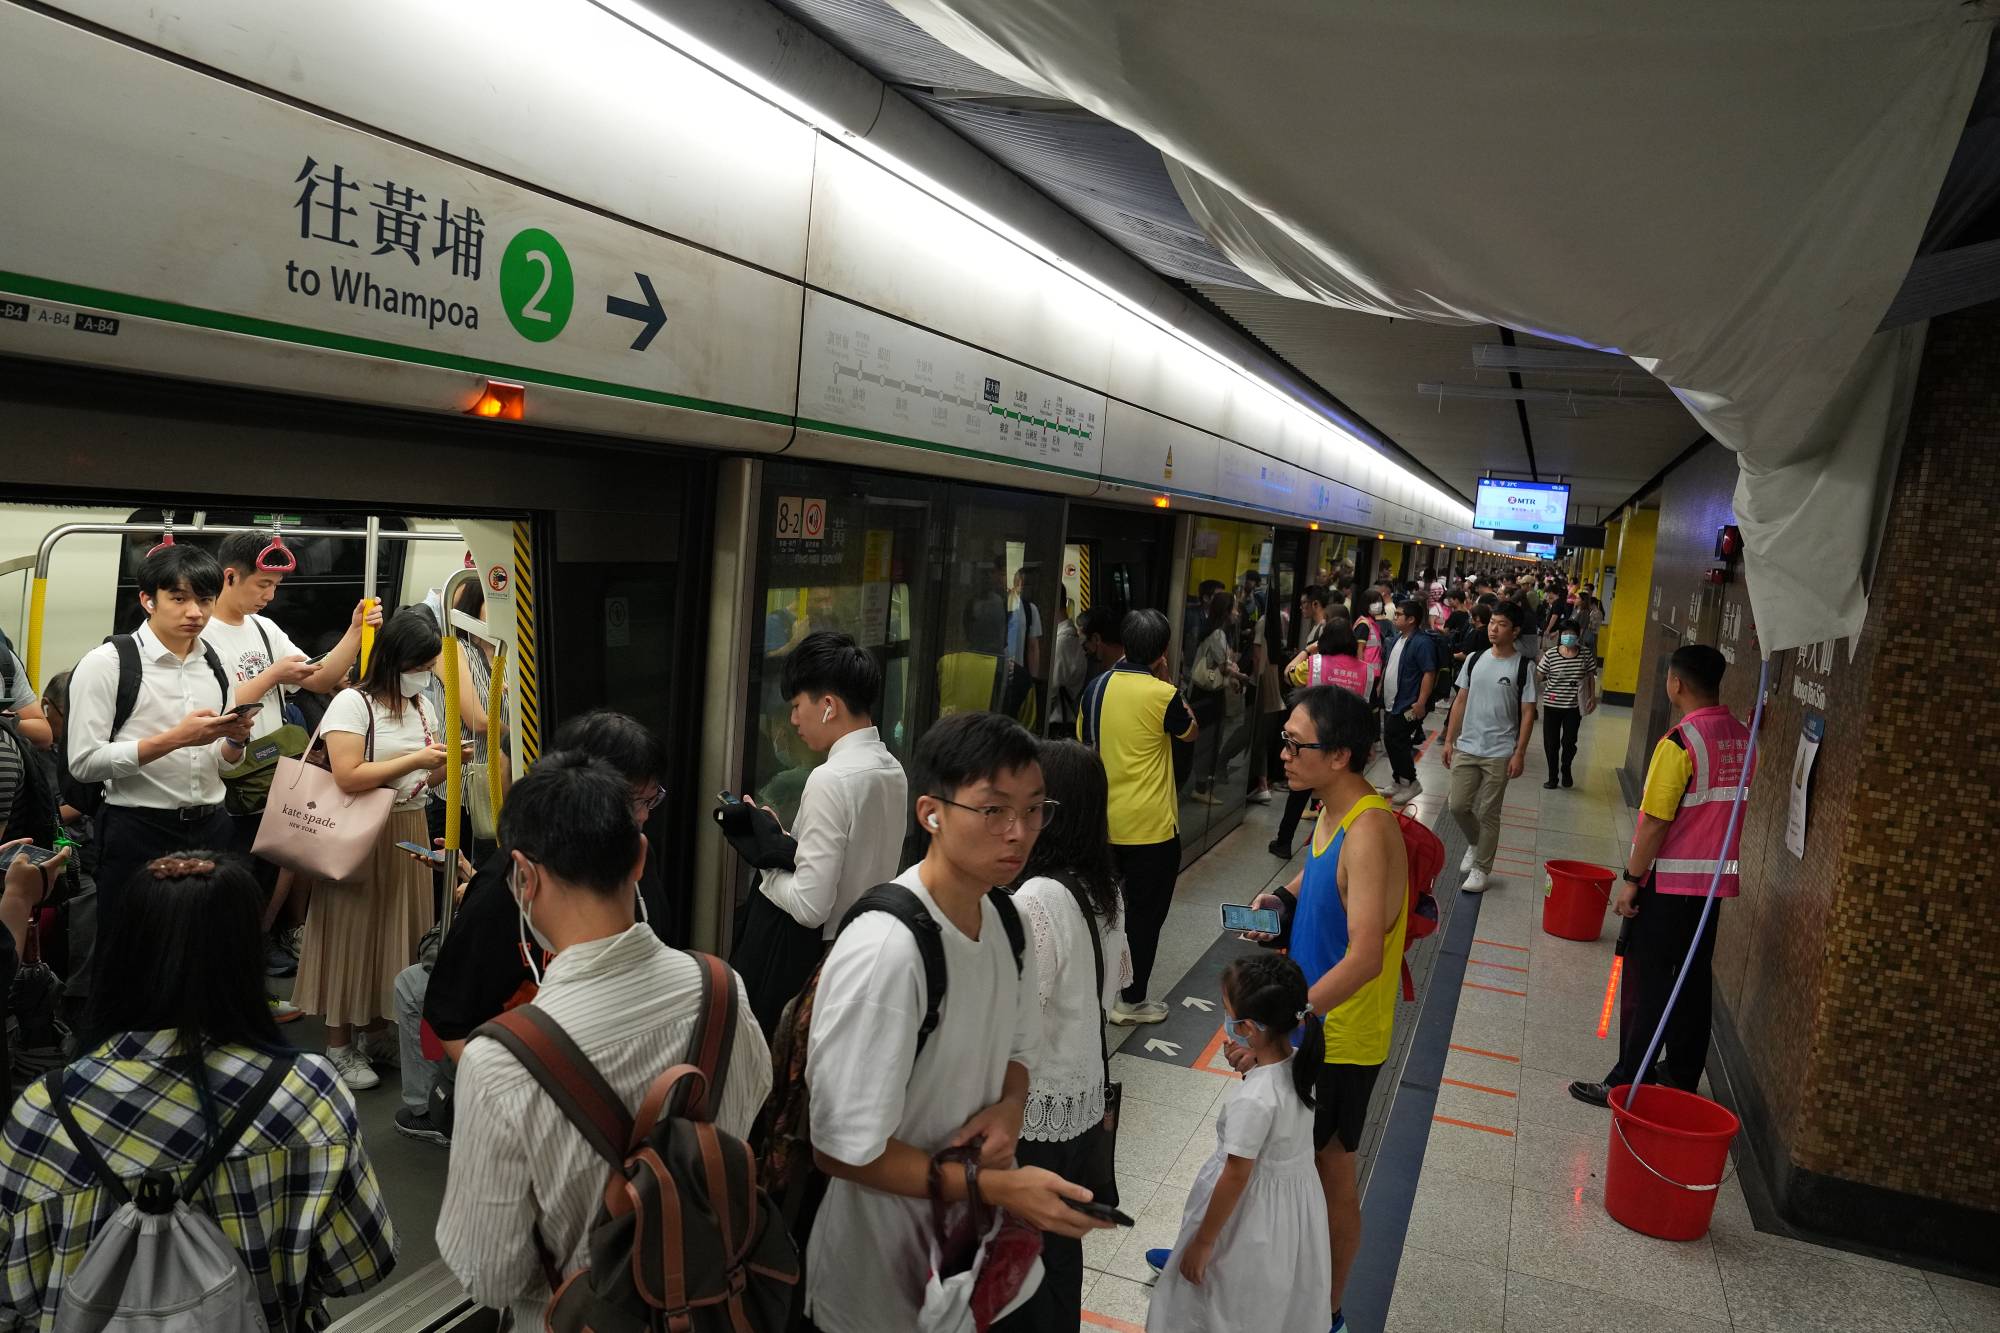 Many commuters say they left home early to make sure they could reach work on time. Photo: Elson Li